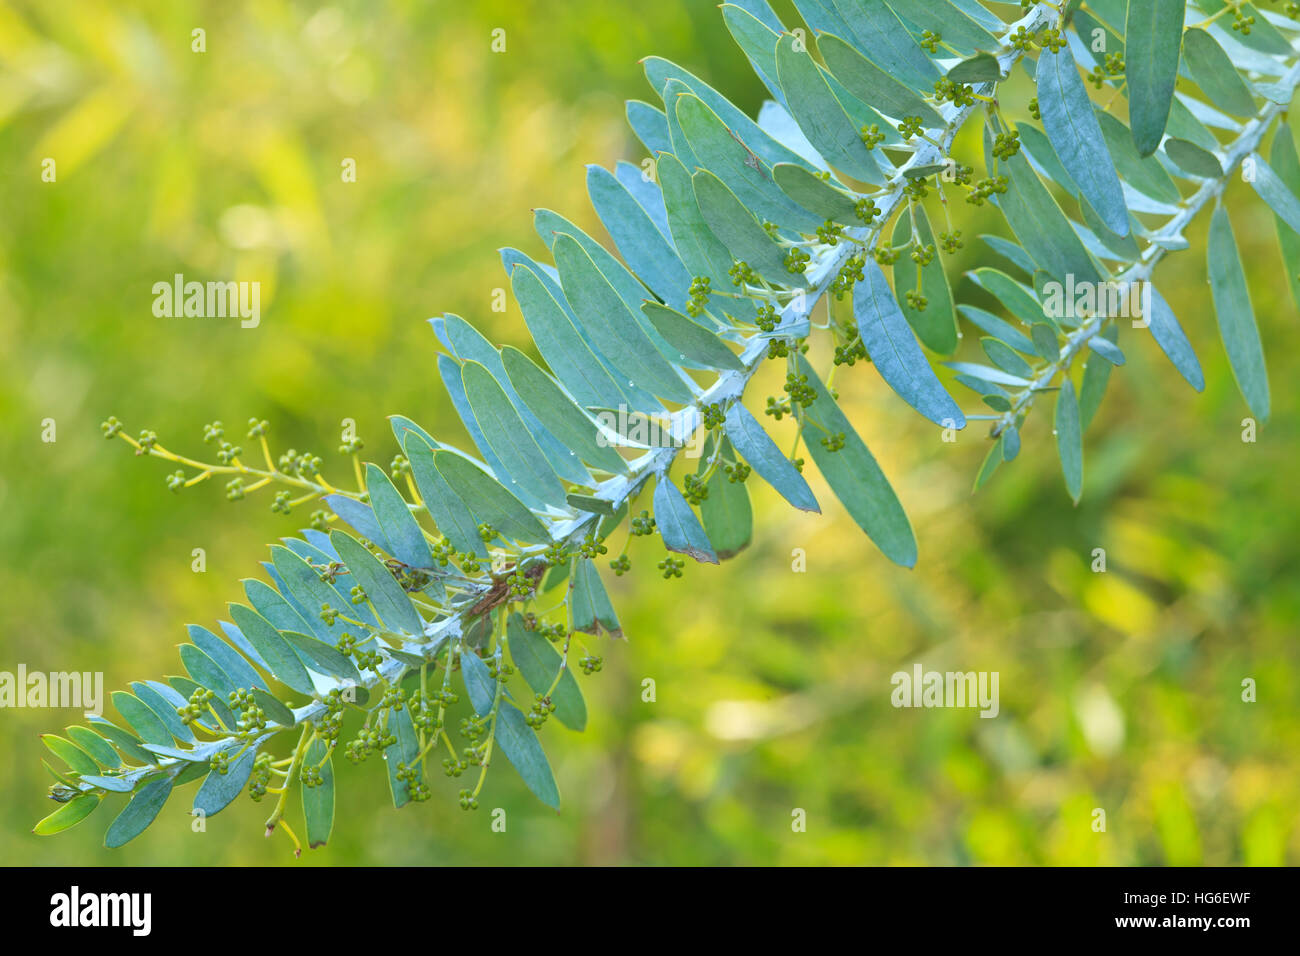 Wattle, Acacia covenyi, feuilles Banque D'Images